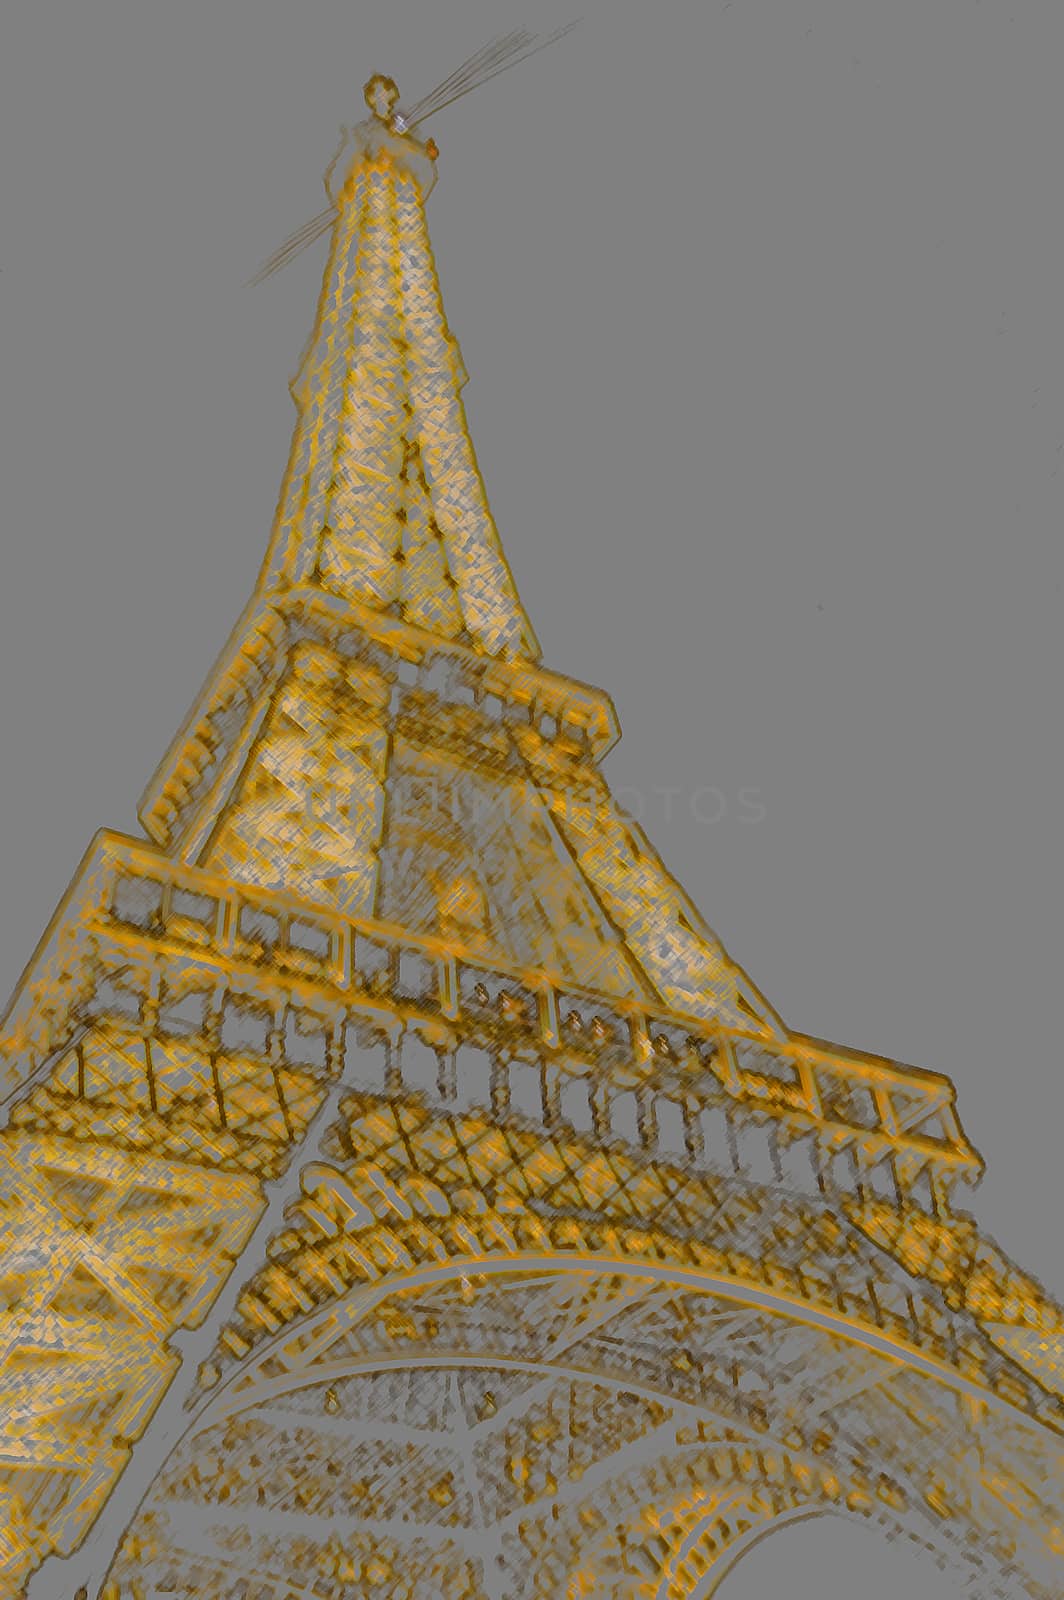 The Eiffel tower is one of the most recognizable landmarks in the world, Paris, France